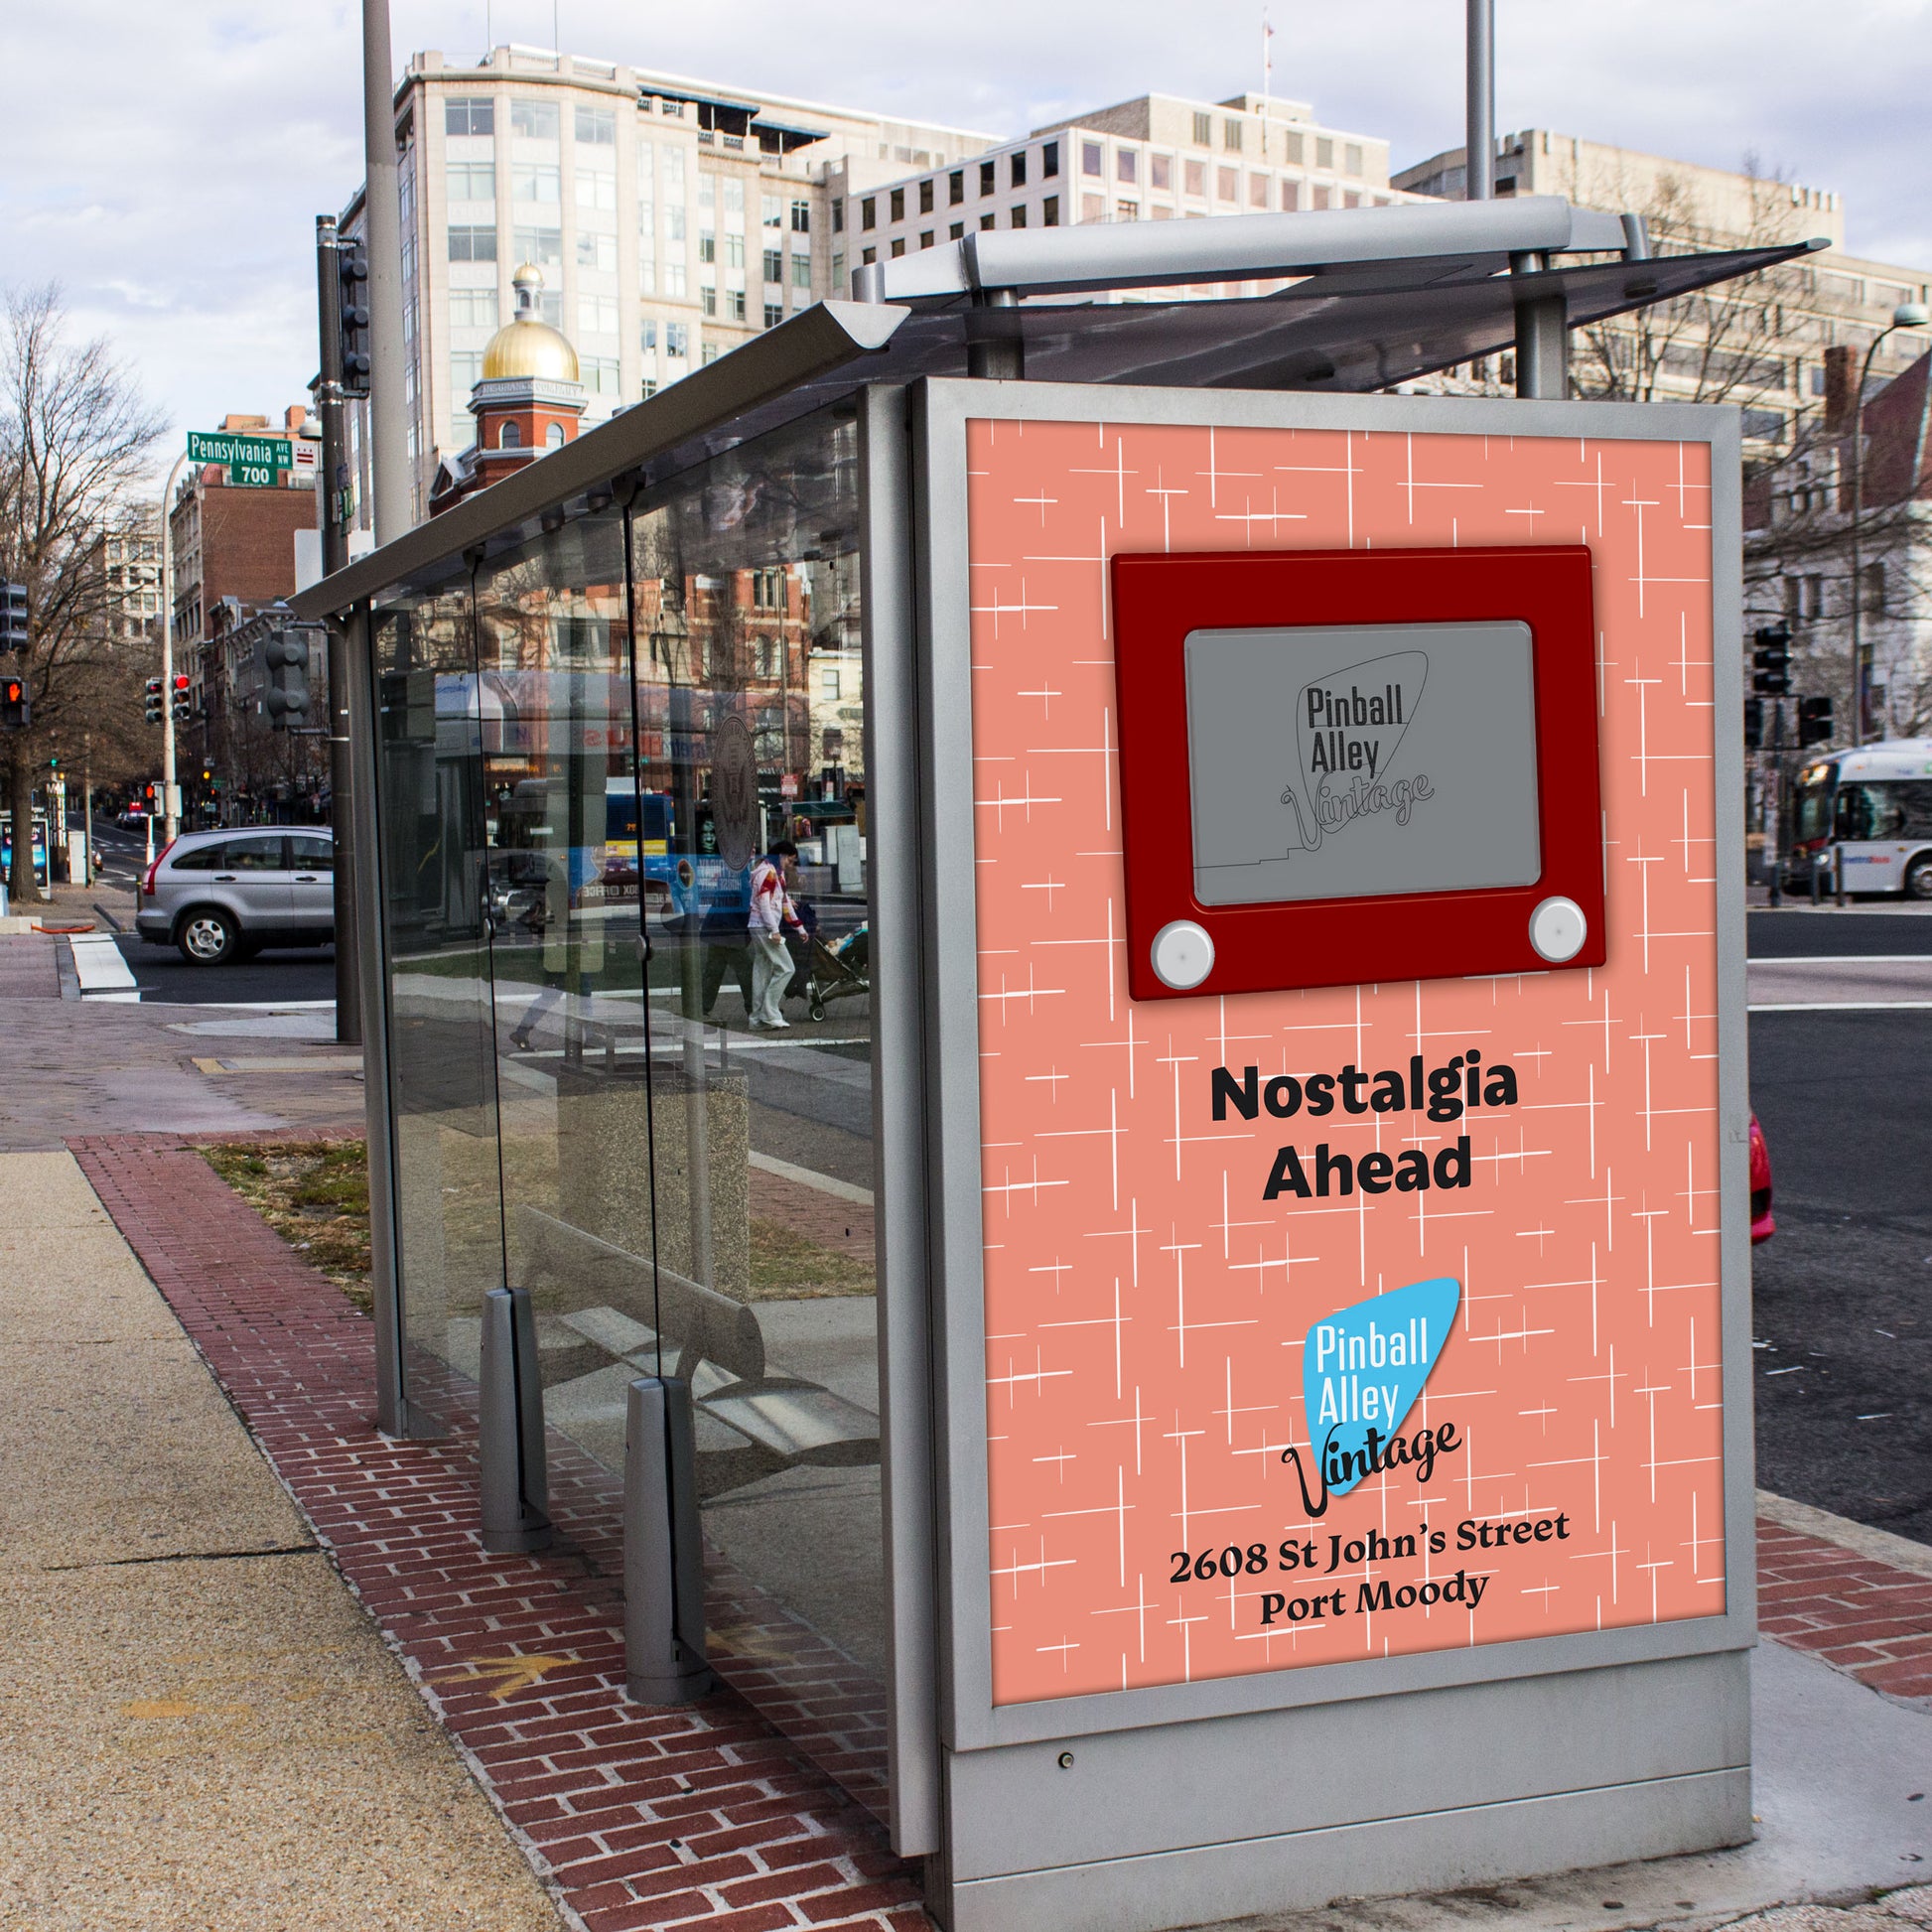 Mockup of bus shelter ad for Pinball Alley Vintage; Nostalgia Ahead